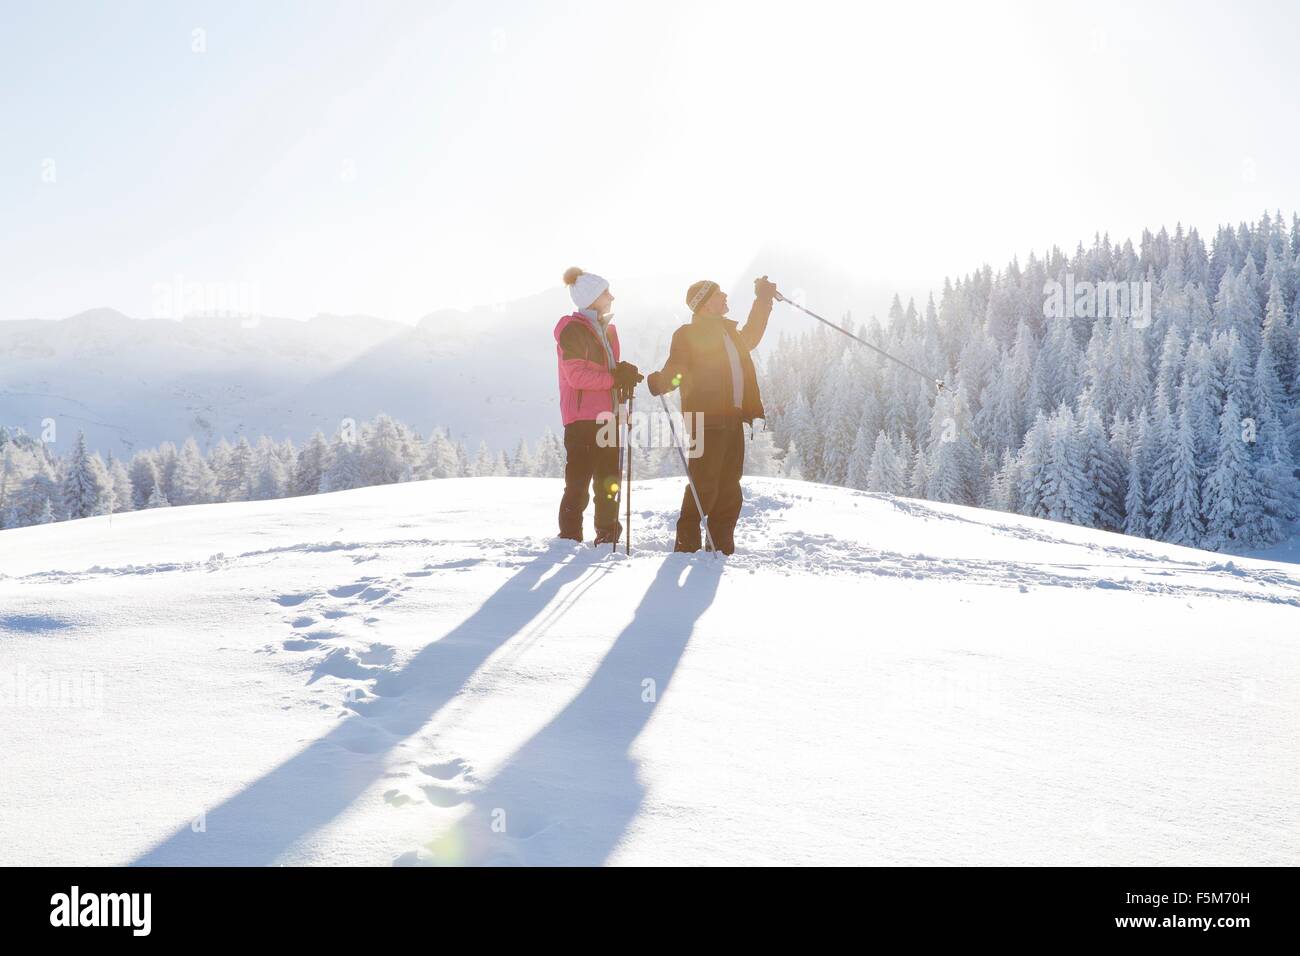 Senior couple on snow covered landscape holding walking looking away, Sattelbergalm, Tyrol, Autriche Banque D'Images